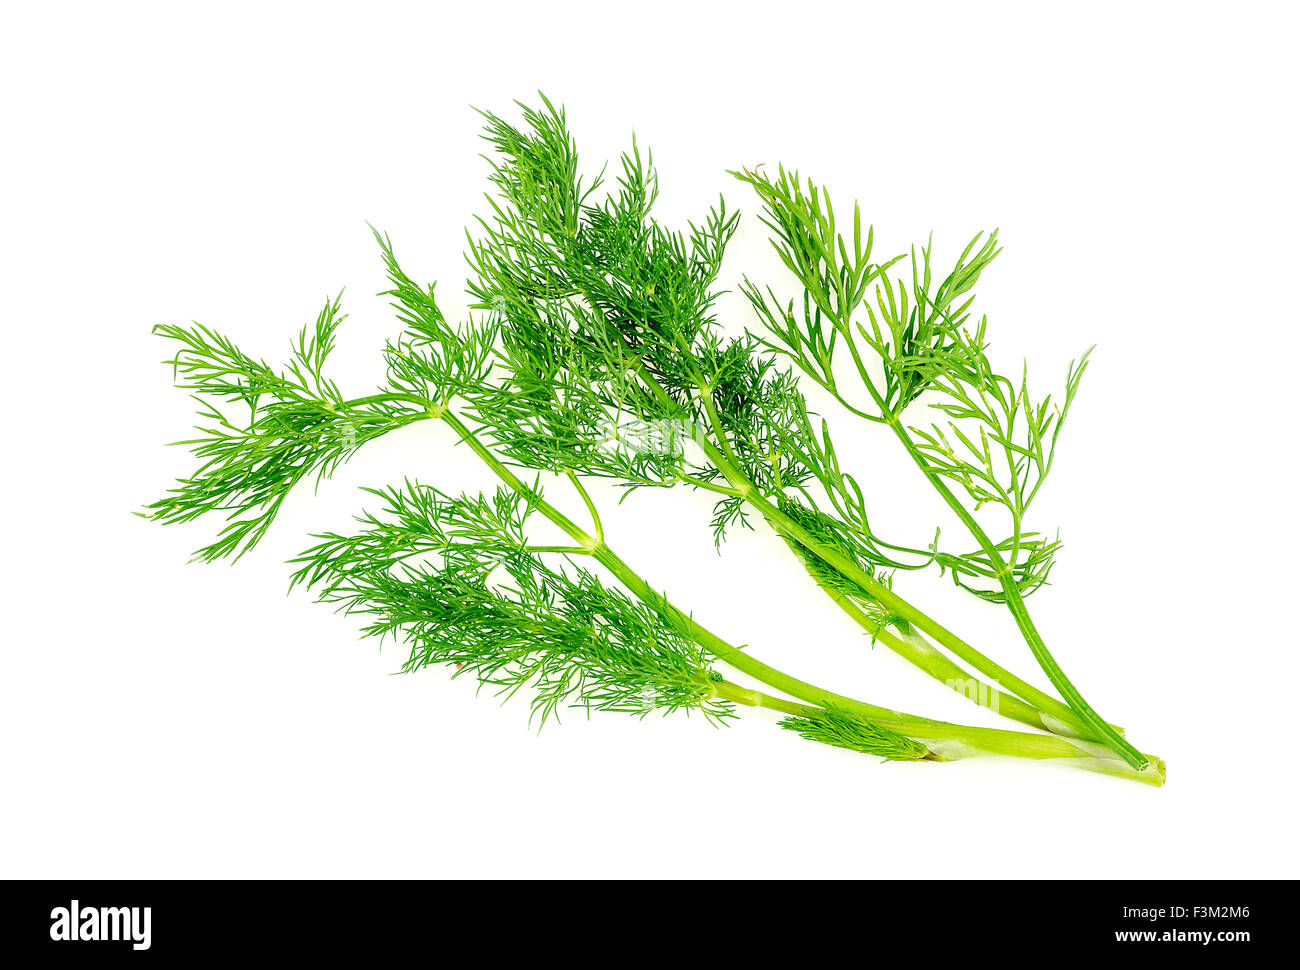 Tasty dill herb garnish isolated on white Stock Photo